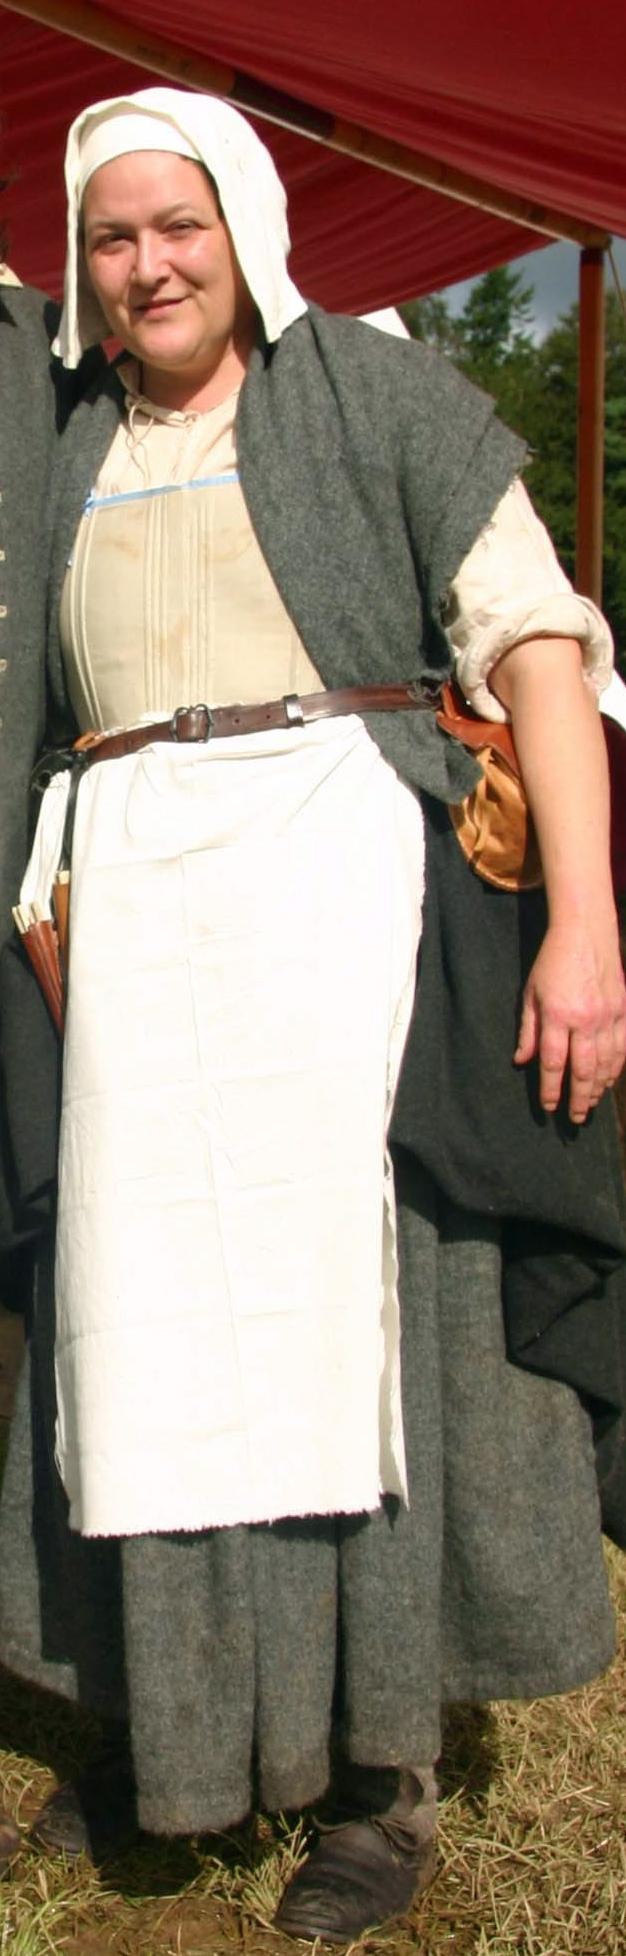 An APRON should be worn for general work. This consists of a simple rectangle tied around the waist.